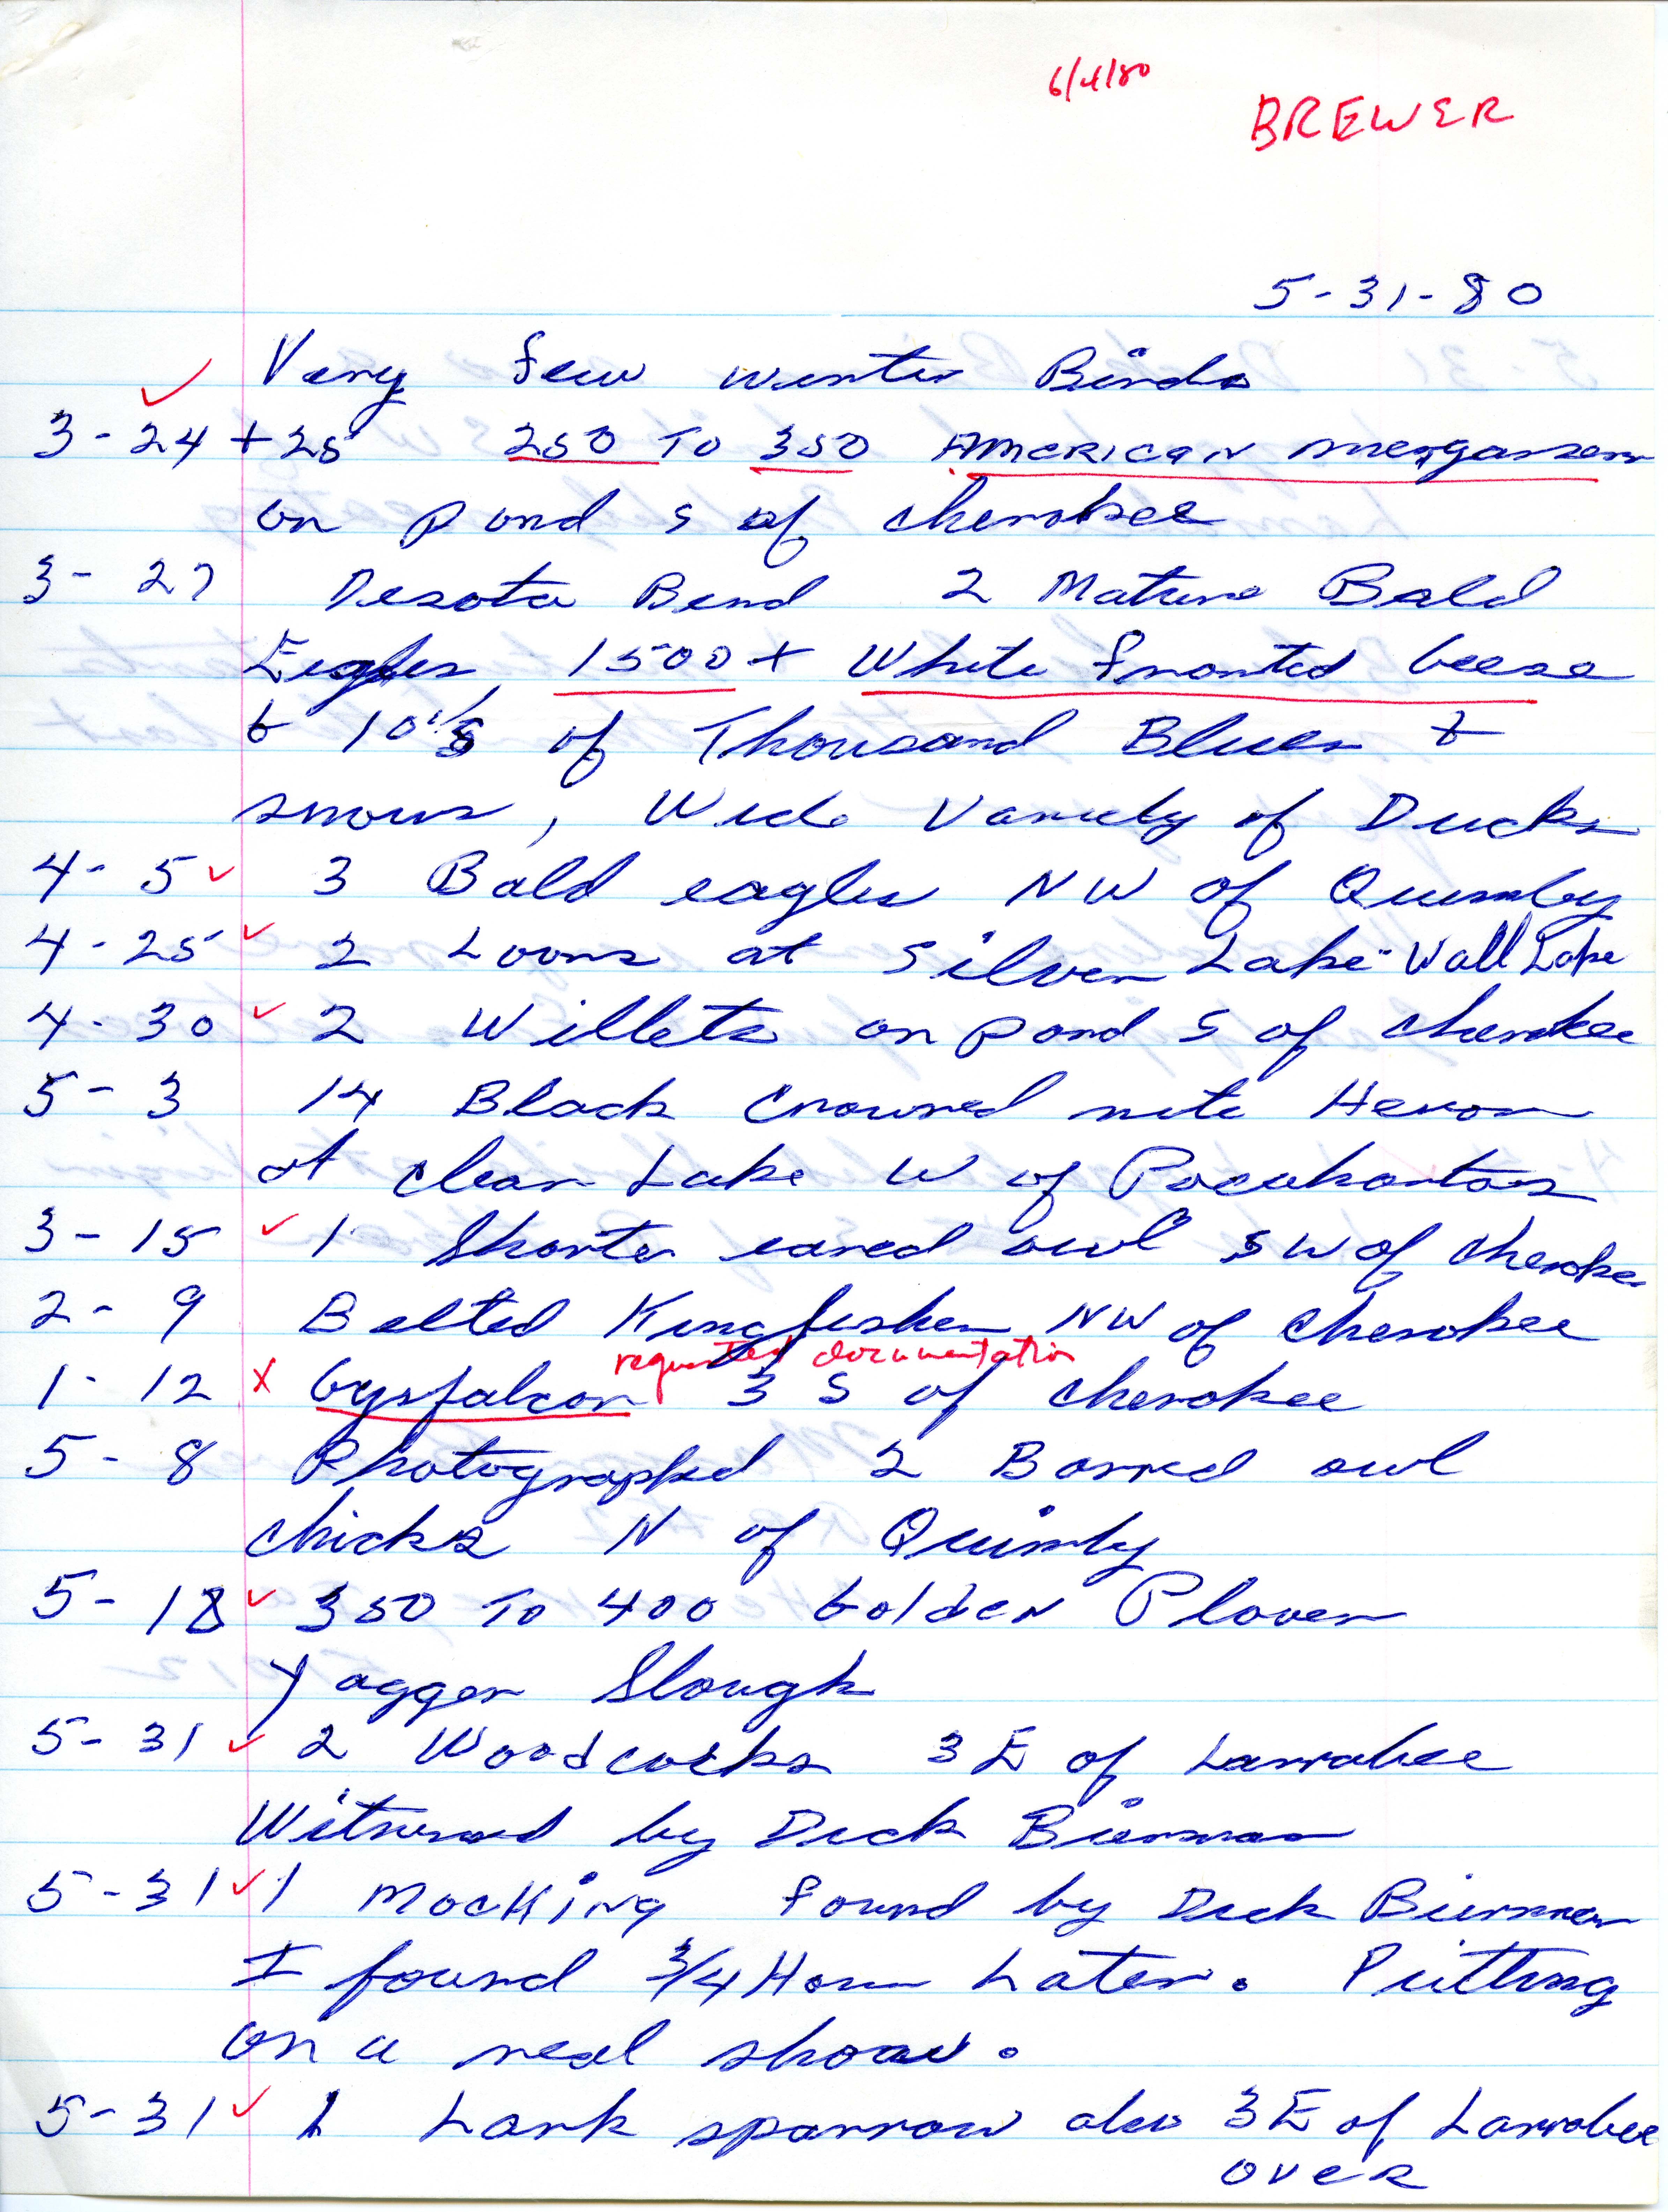 Field notes contributed by Marion M. Brewer, May 31, 1980.